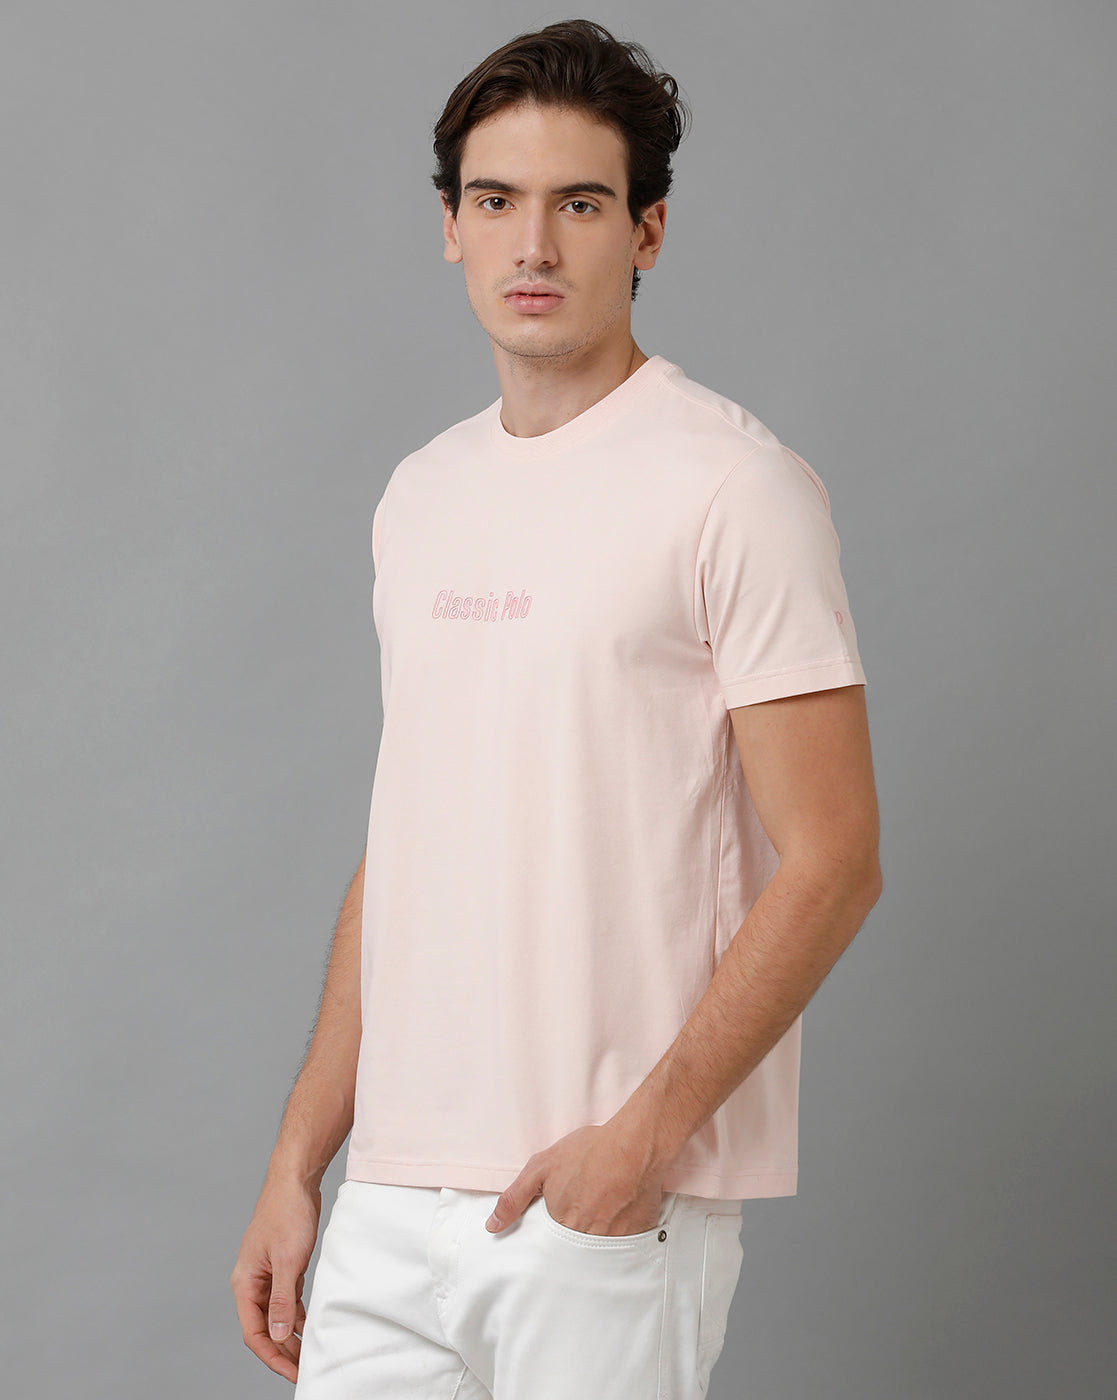 Classic Polo Men's Cotton Half Sleeve Solid Slim Fit Round Neck Pink Color T-Shirt | Baleno - 507 A